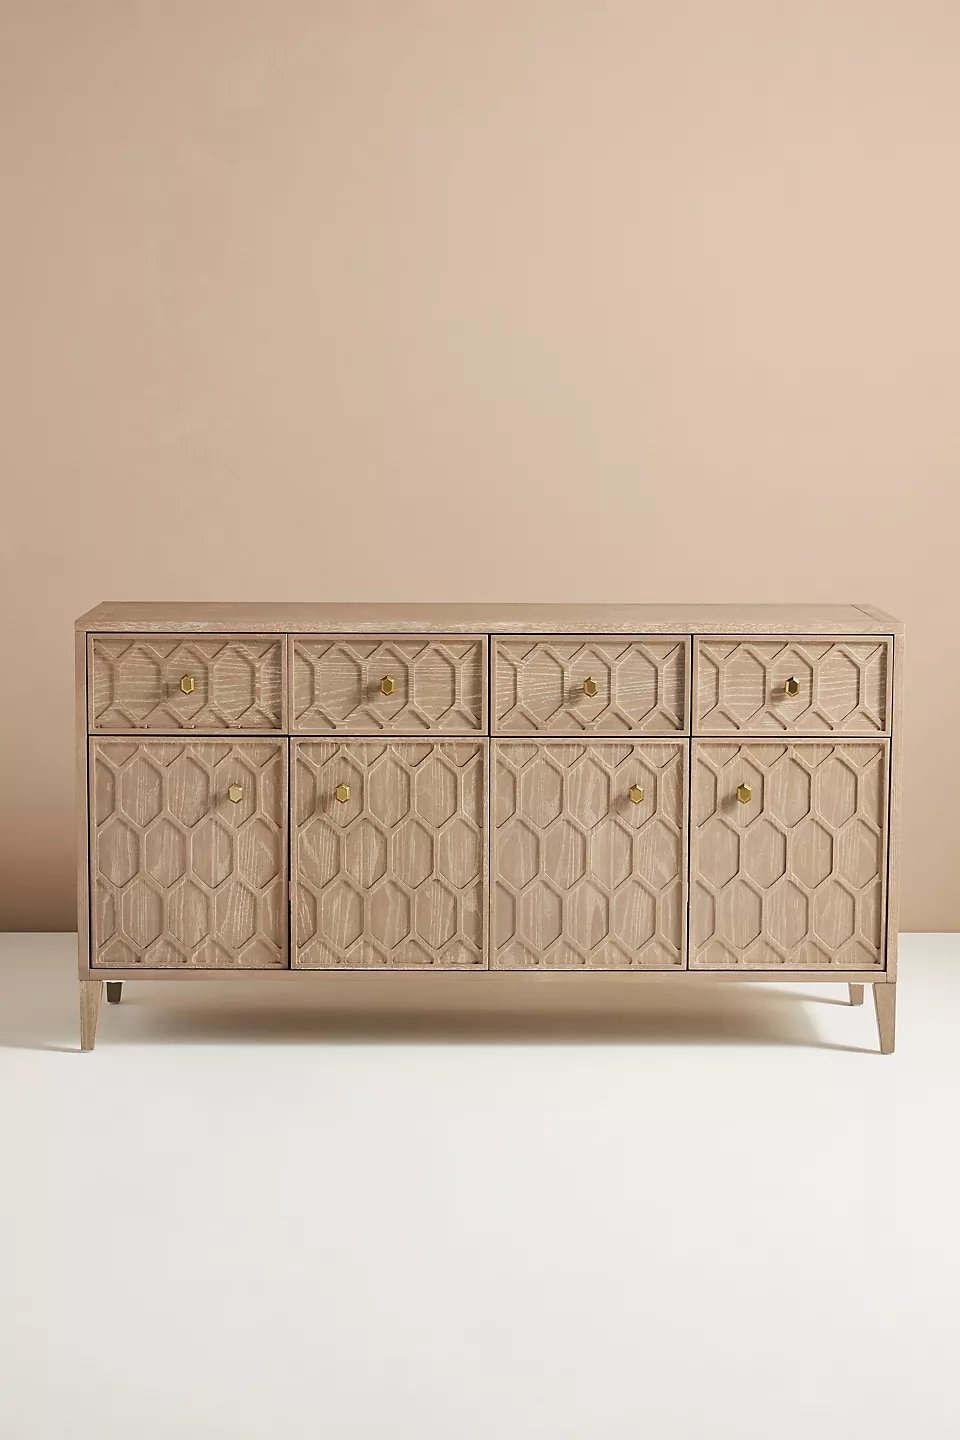 Textured Trellis Buffet By Anthropologie in Grey - Image 0